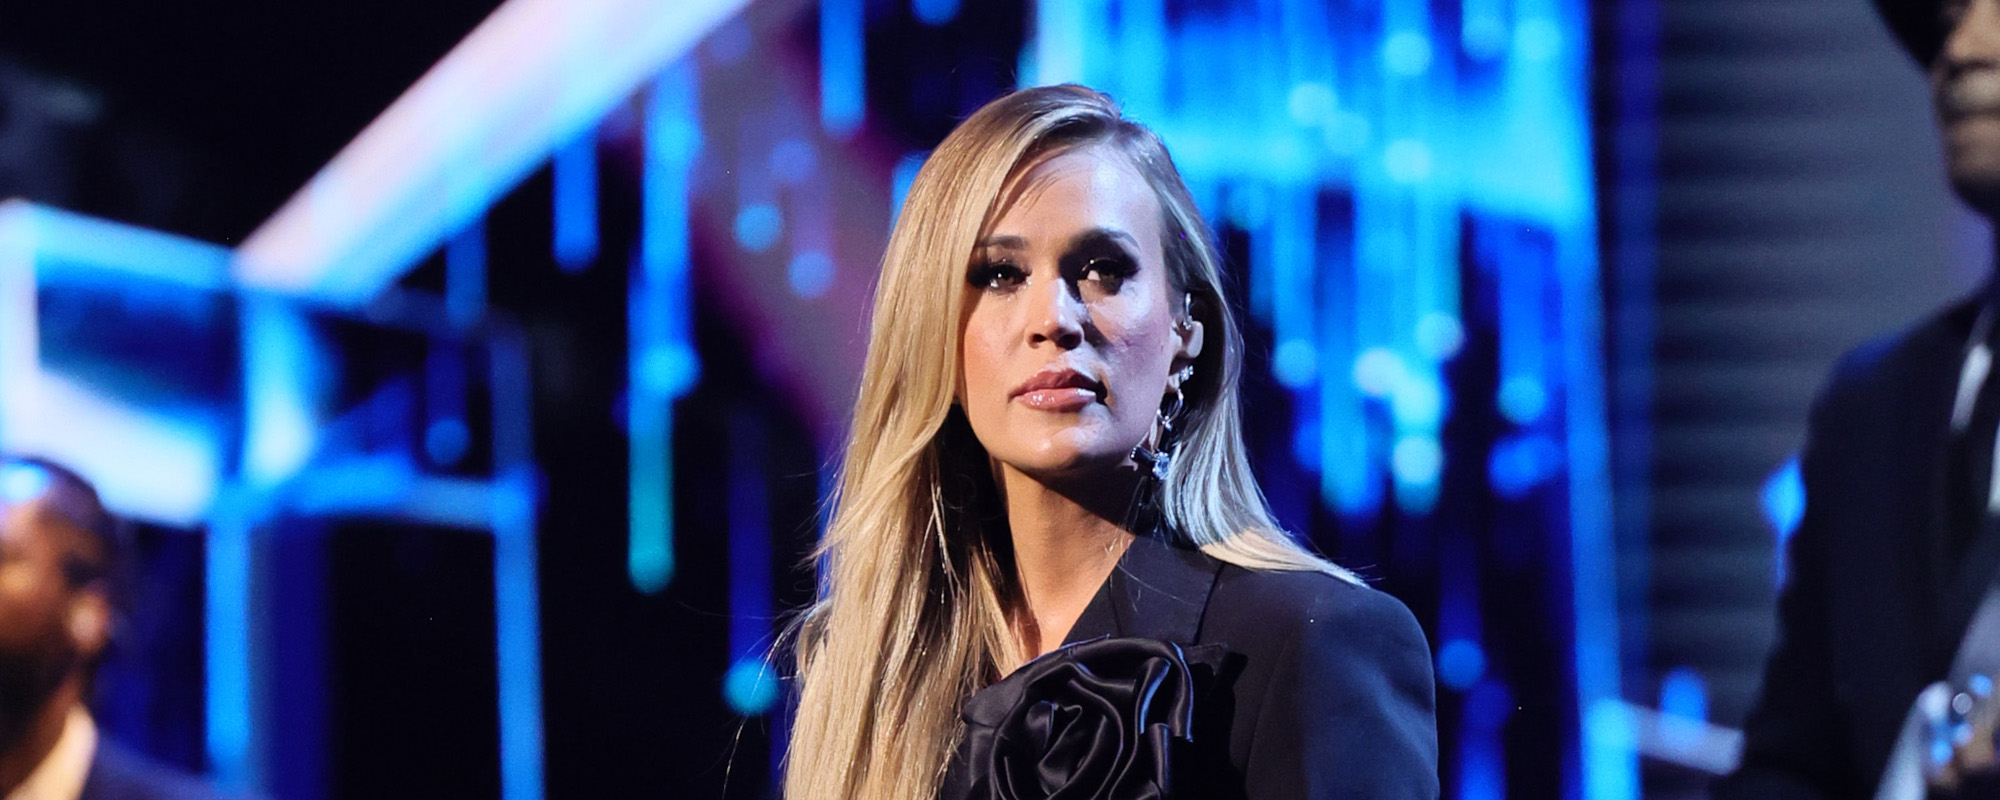 Carrie Underwood is honored to be nominated for CMA Entertainer of the Year  – KIK-FM 100.7